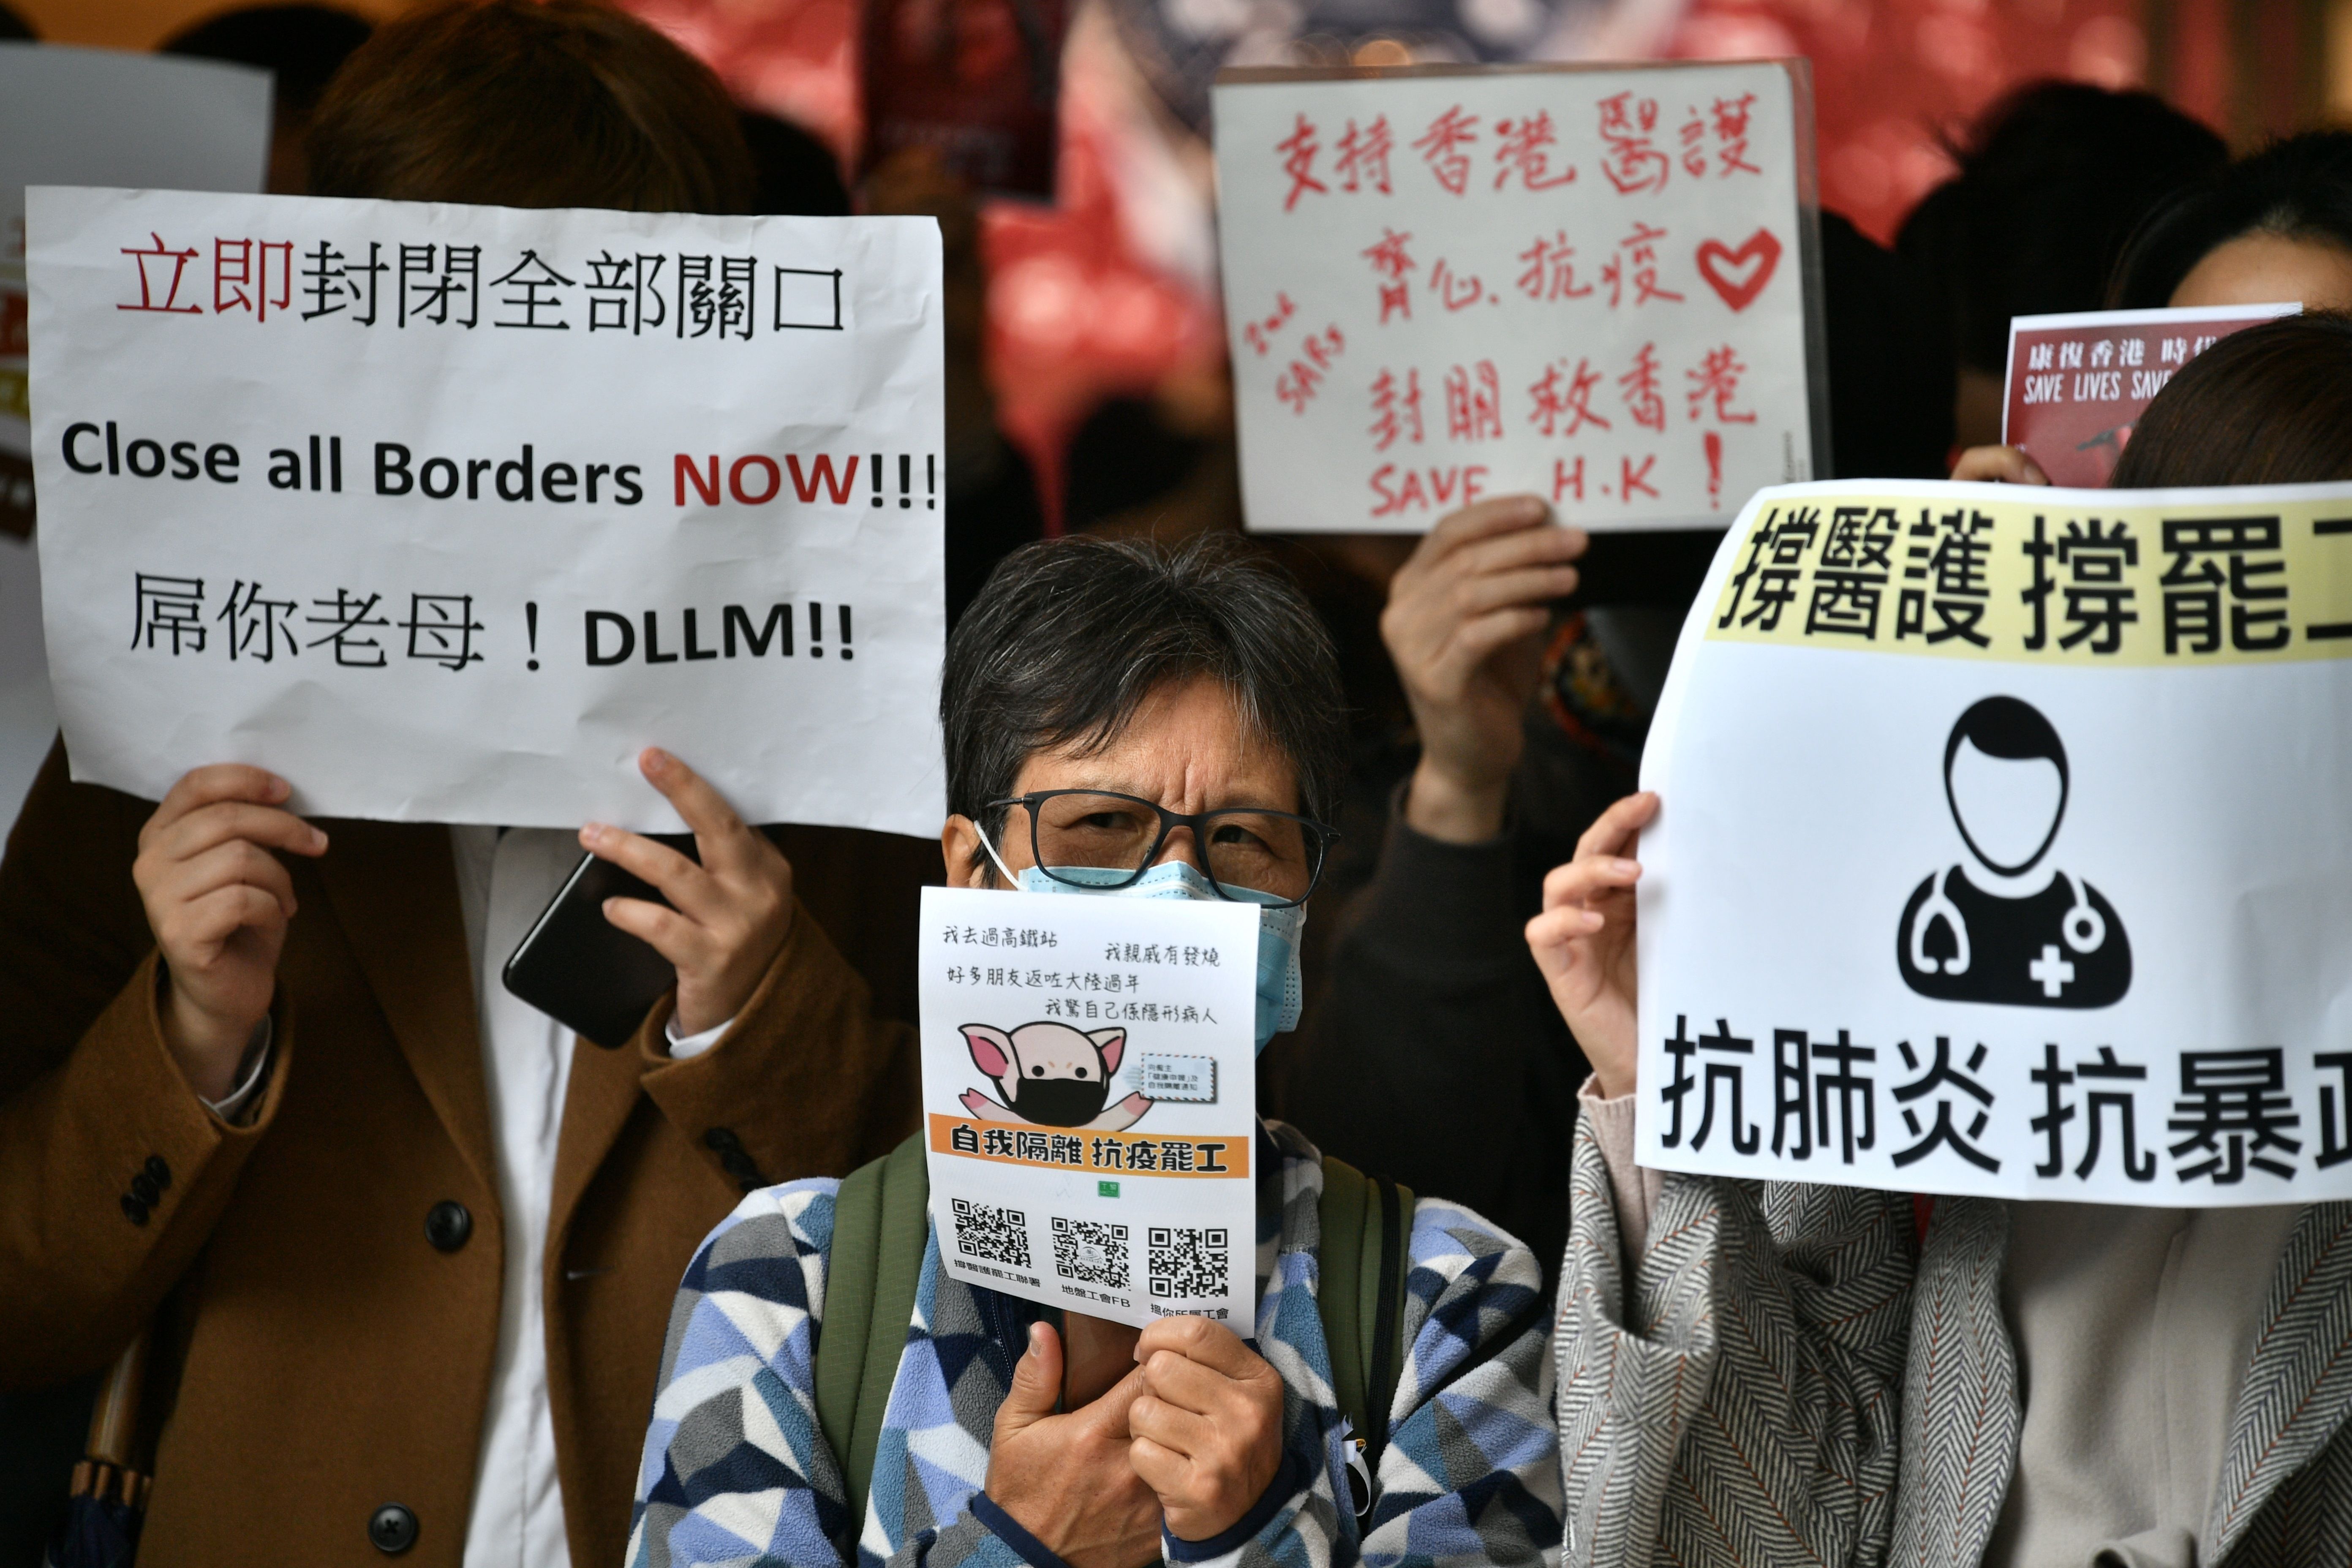 Protesters in Hong Kong calling for the government to close its borders with mainland China, on February 3, 2020.